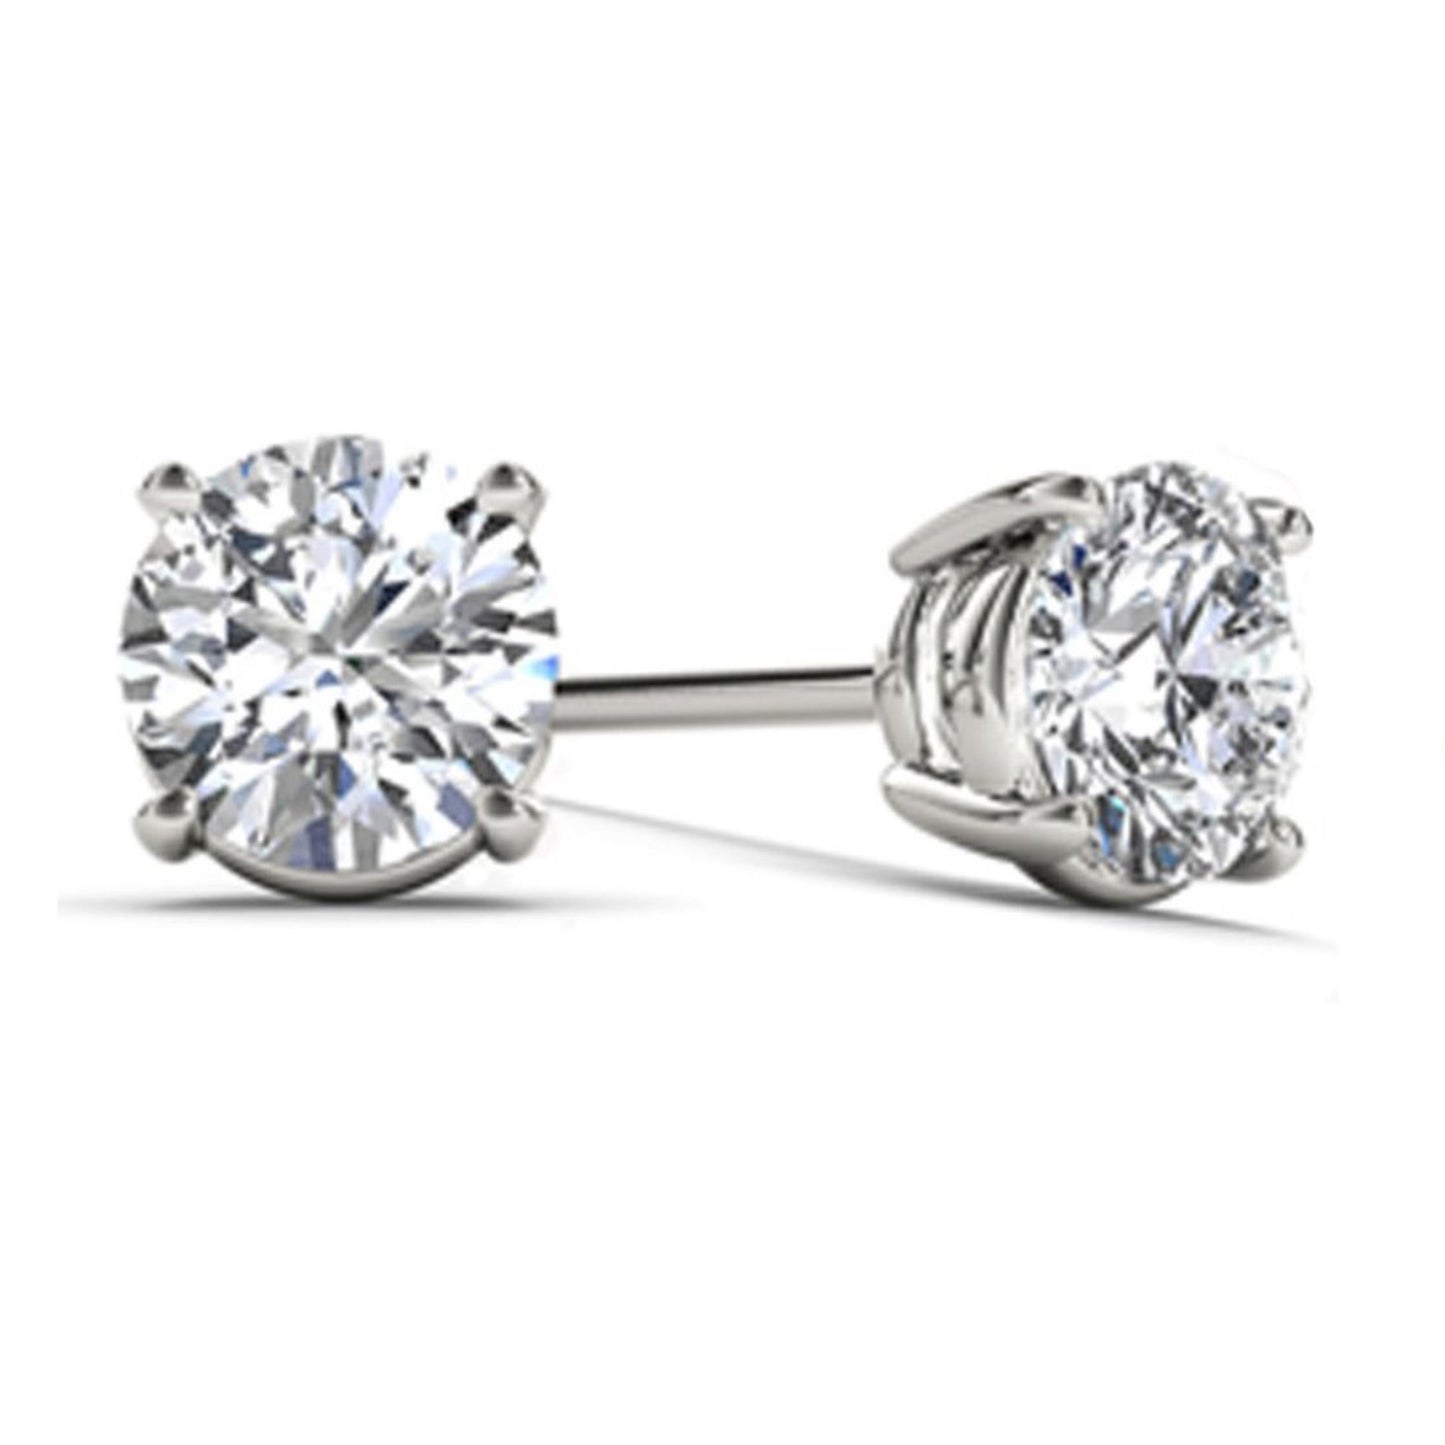 14Kt White Gold 1/2 Ct Genuine Natural Diamond Round Stud Earrings